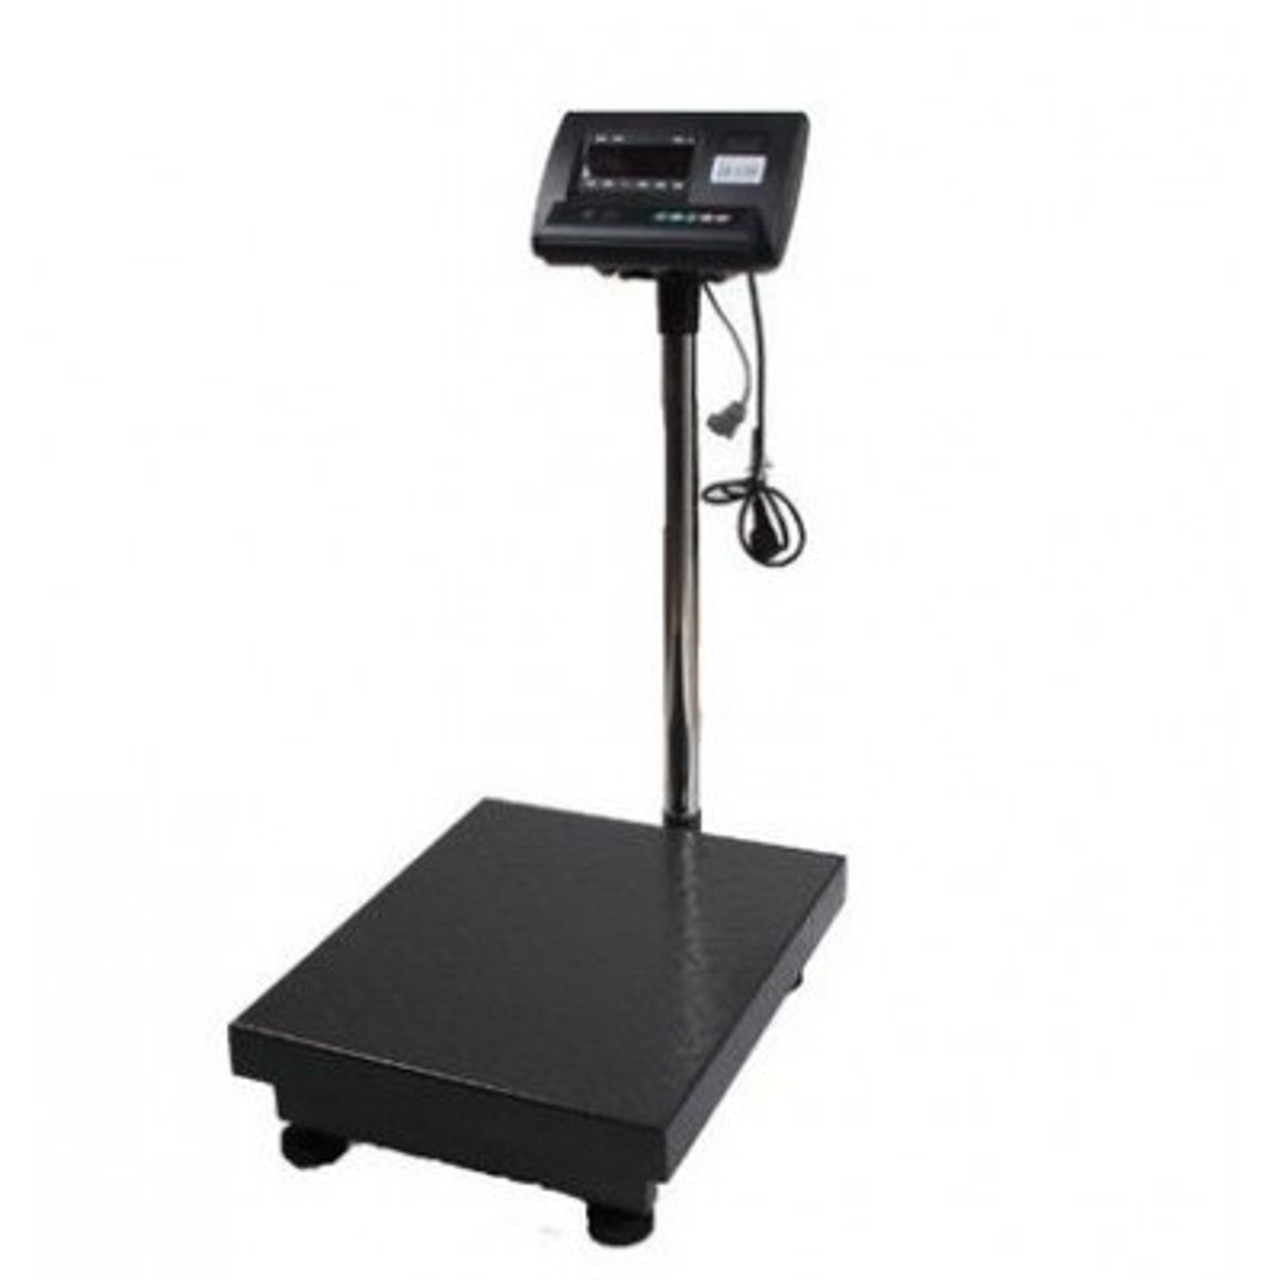 Buy Online Digital Electronic Weighing Scale A-12 - 300KG from GZ